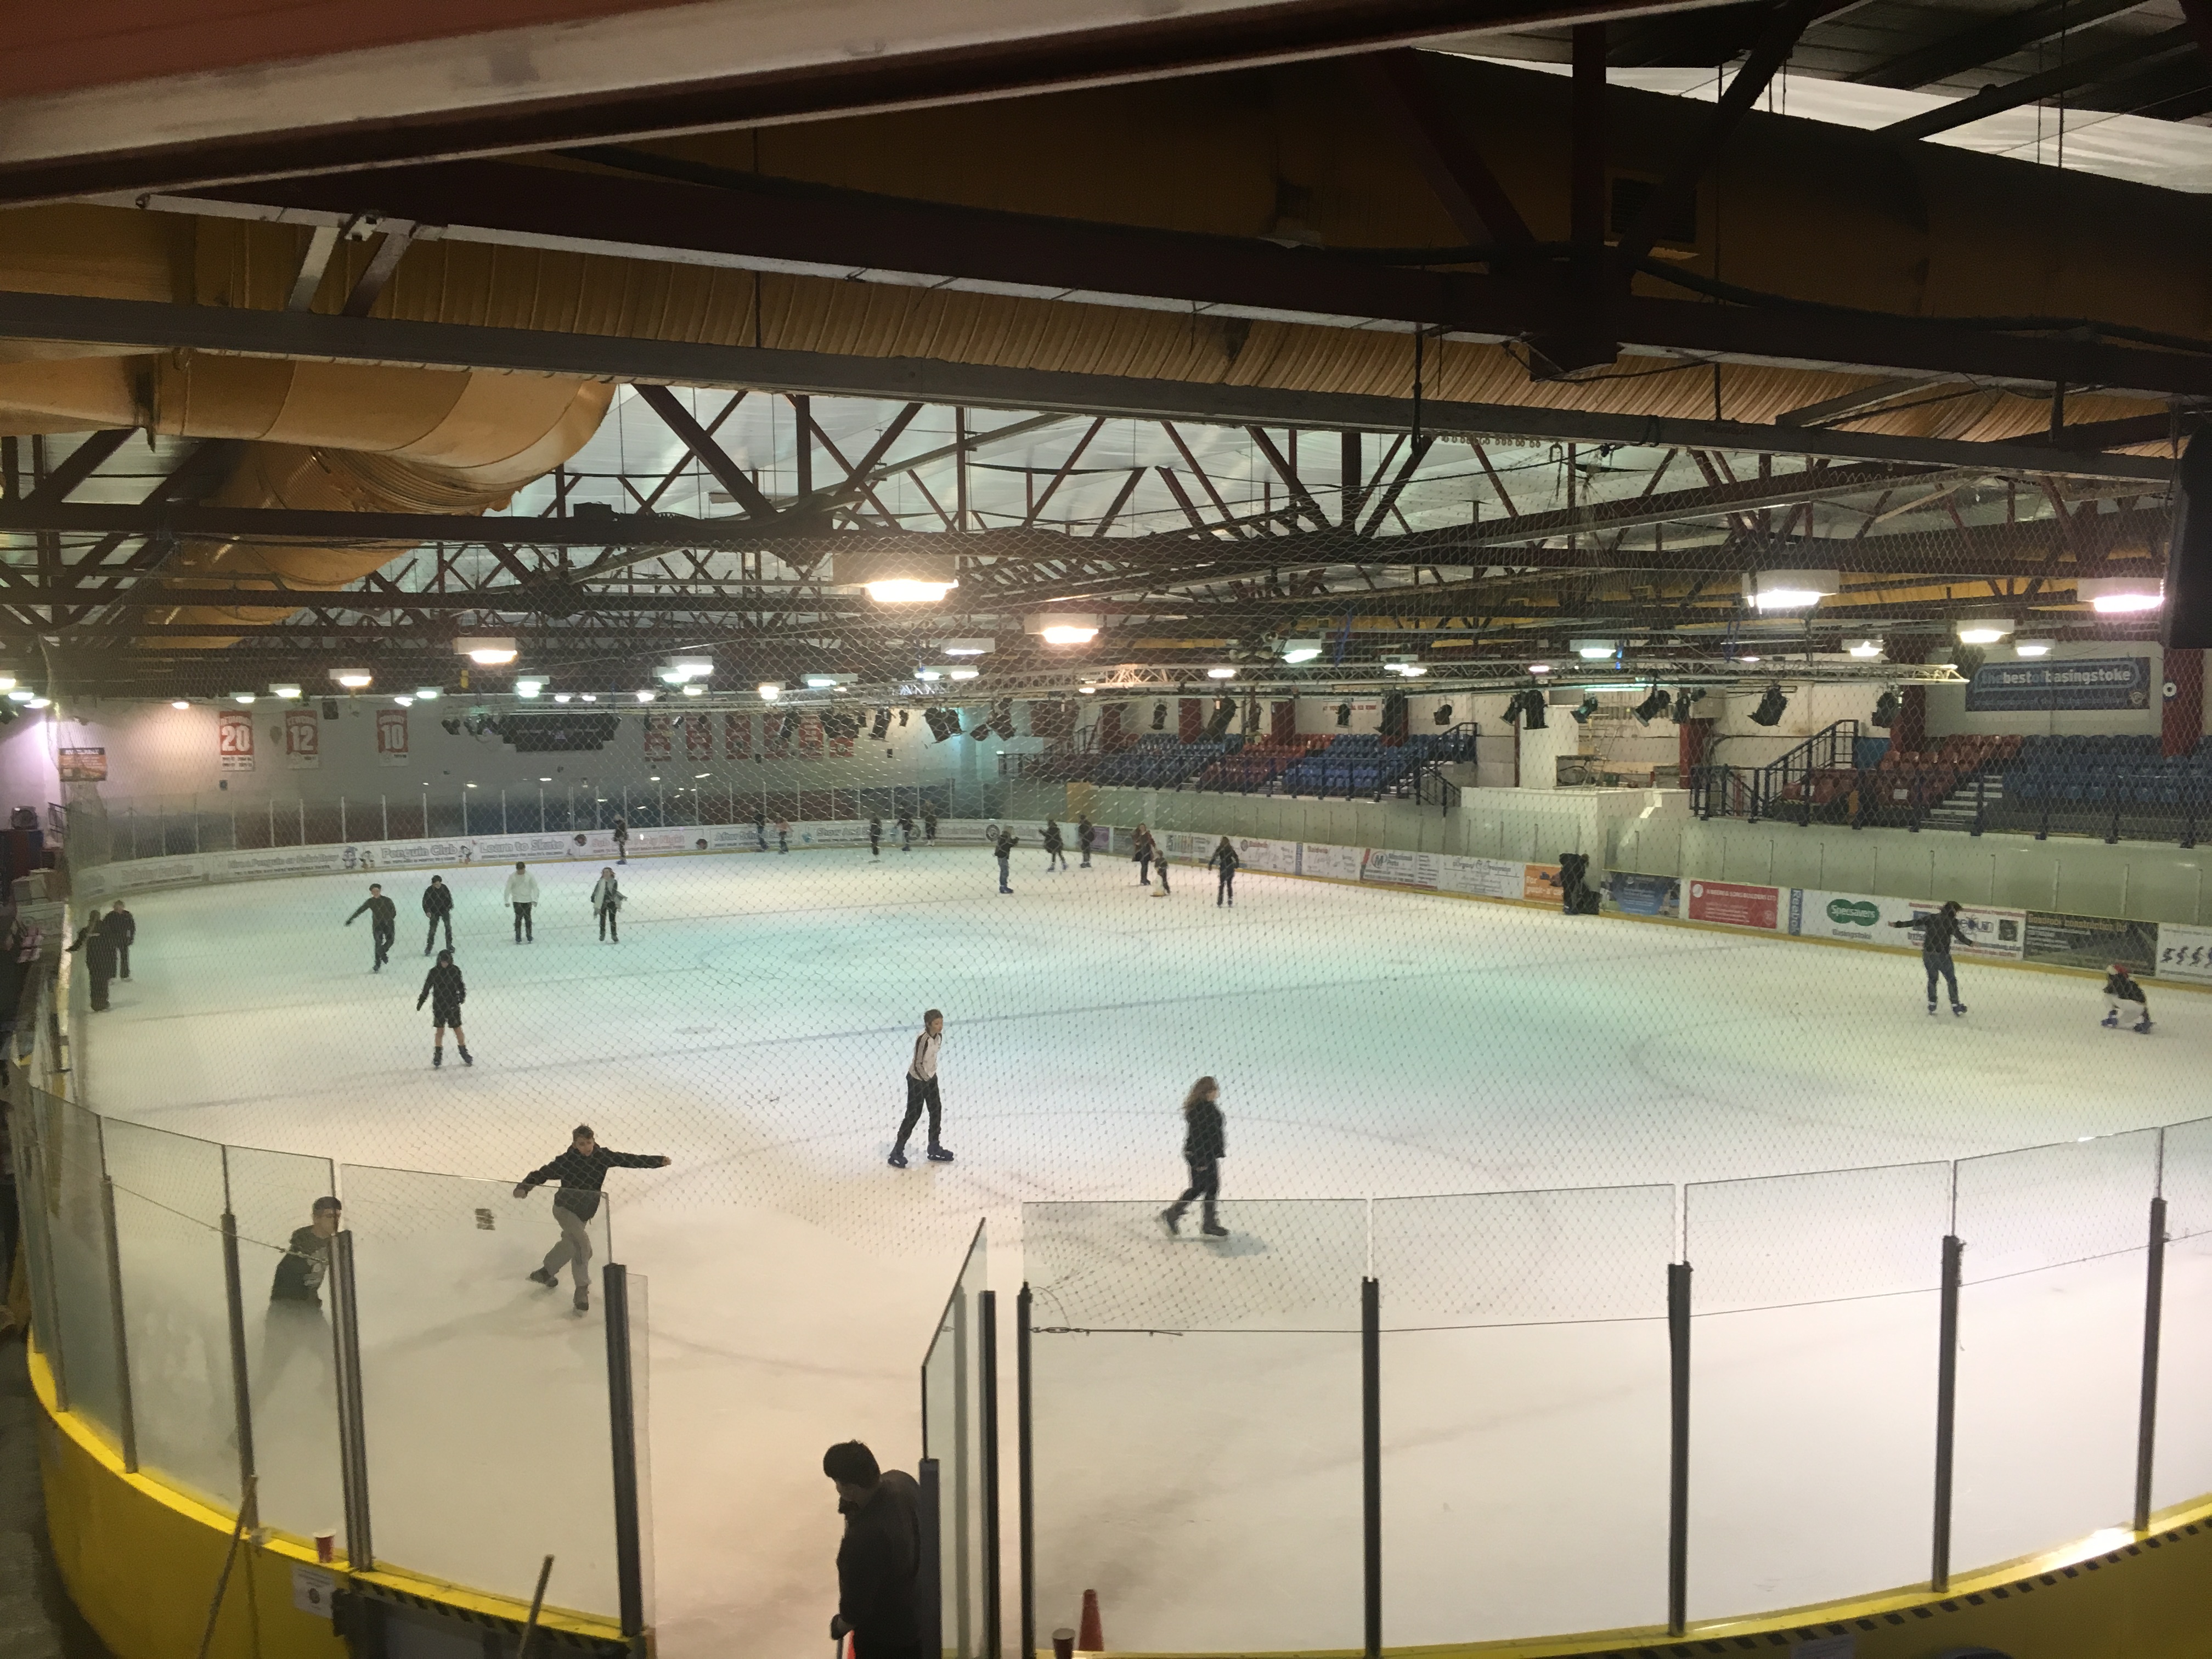 An indoor ice rink with people skating